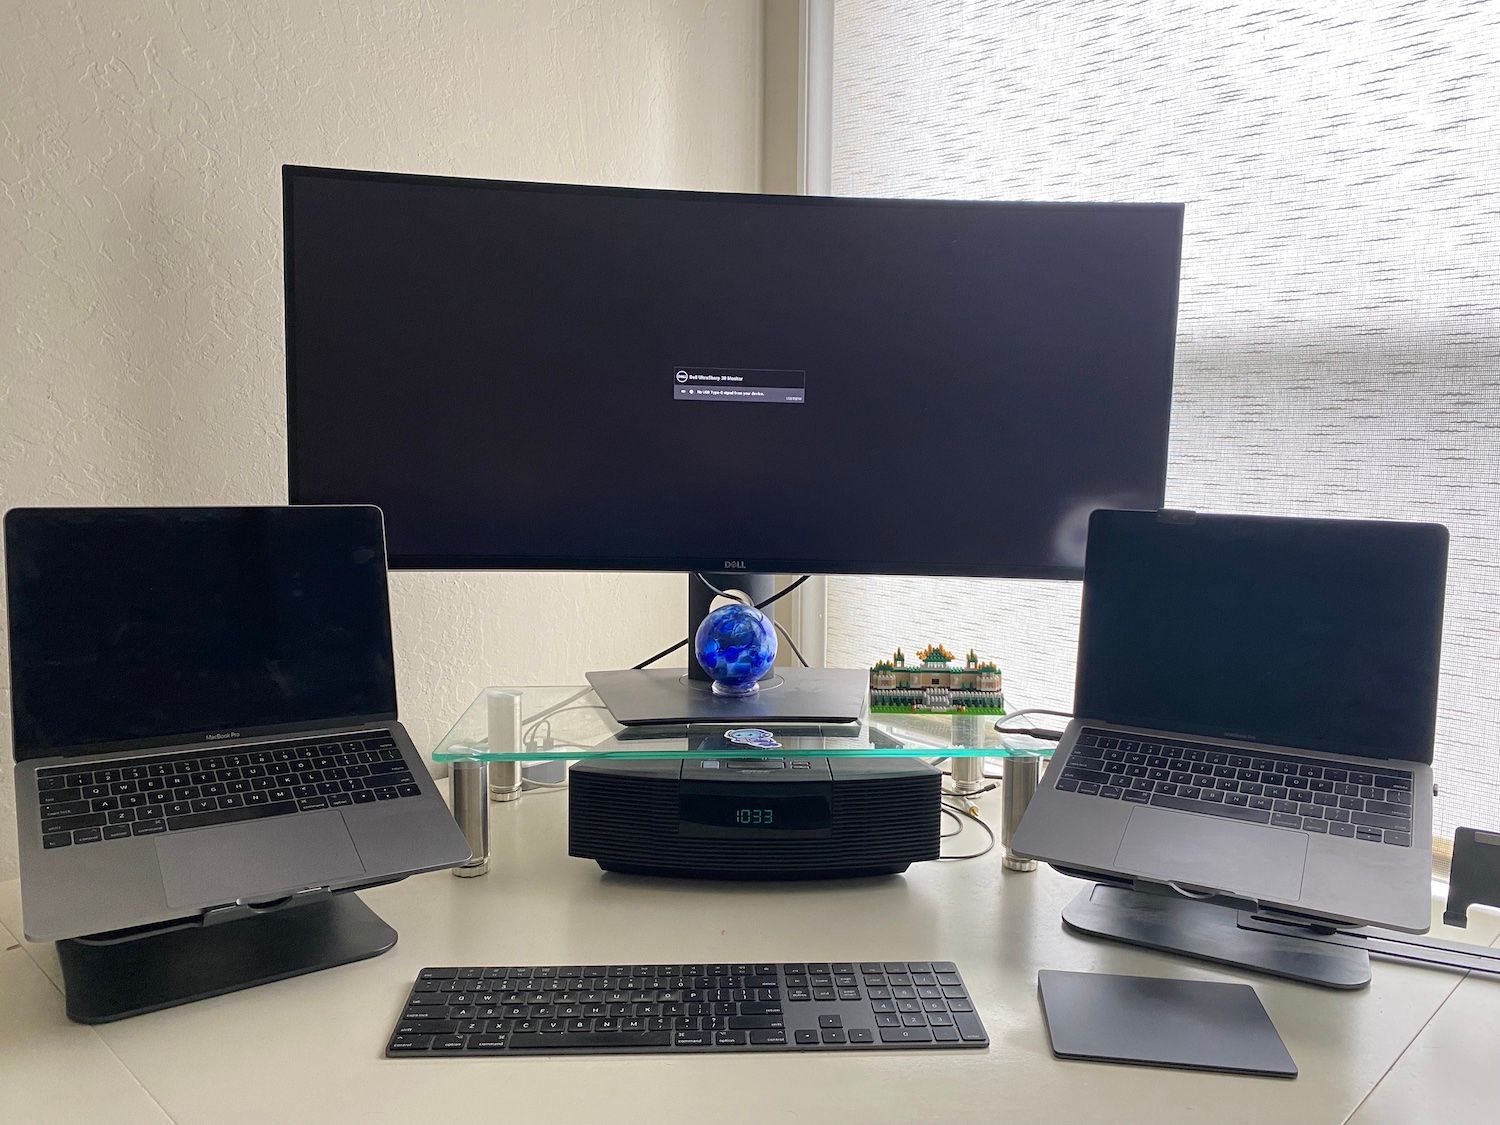 The desk of Donnie Hasseltine, PackageCloud